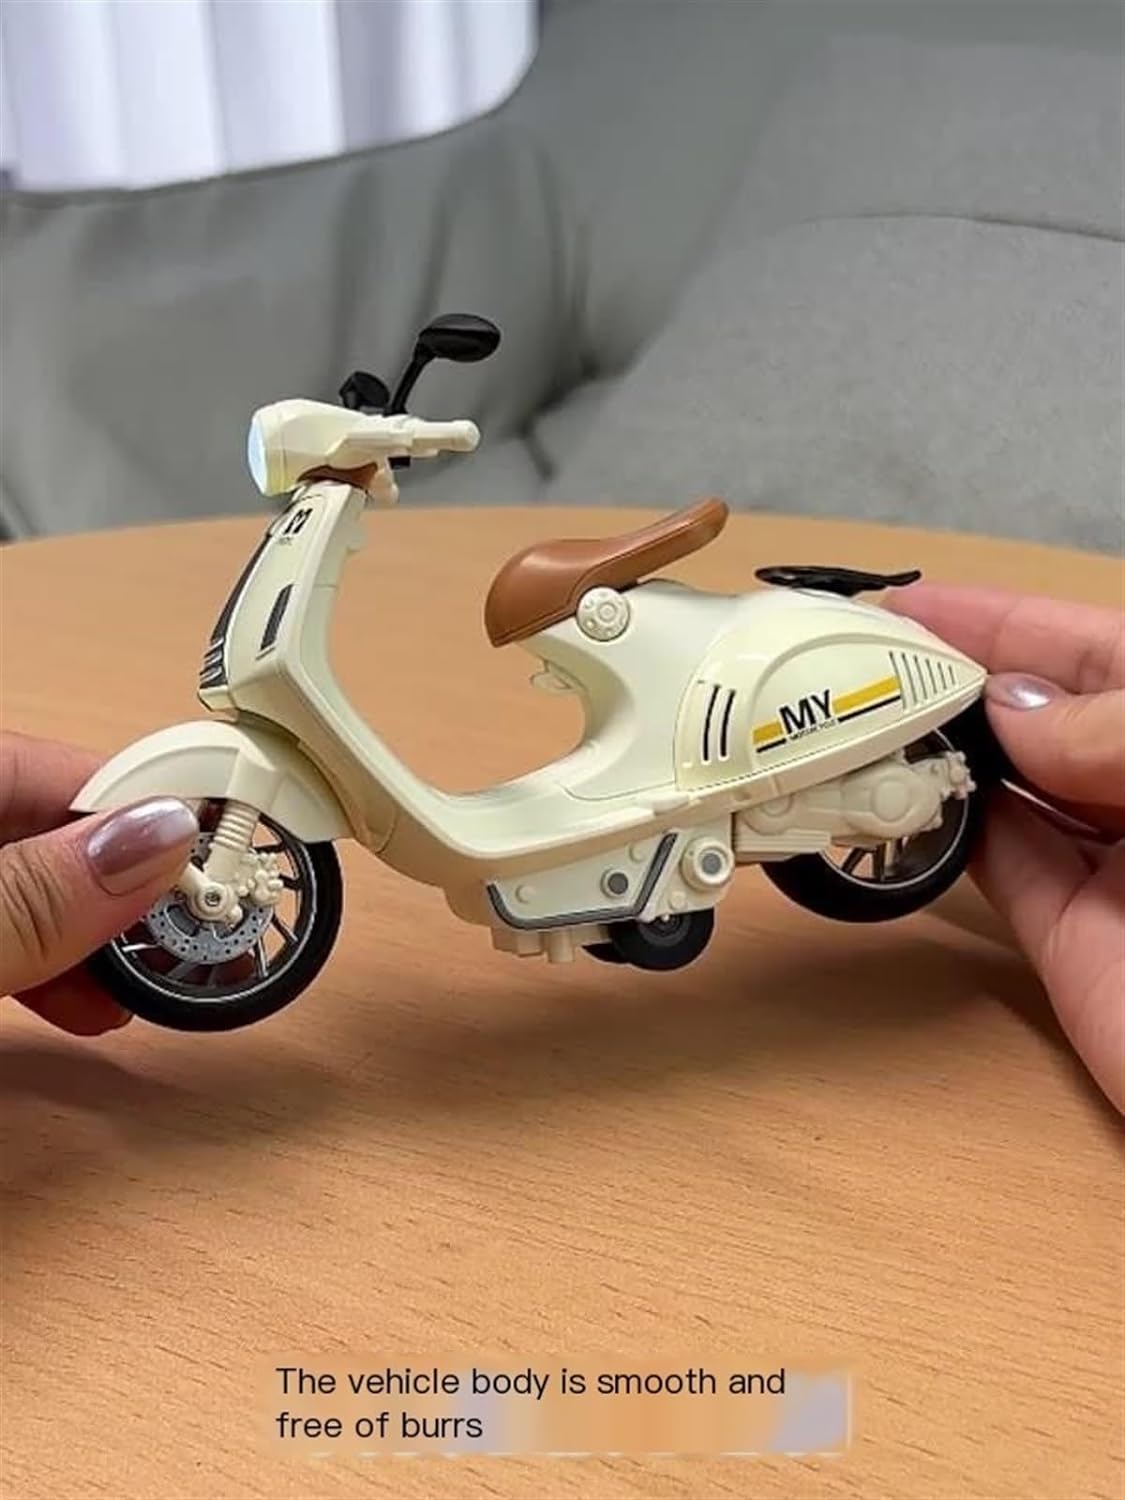 1:10 Simulation Mini Alloy Motorcycle Toy